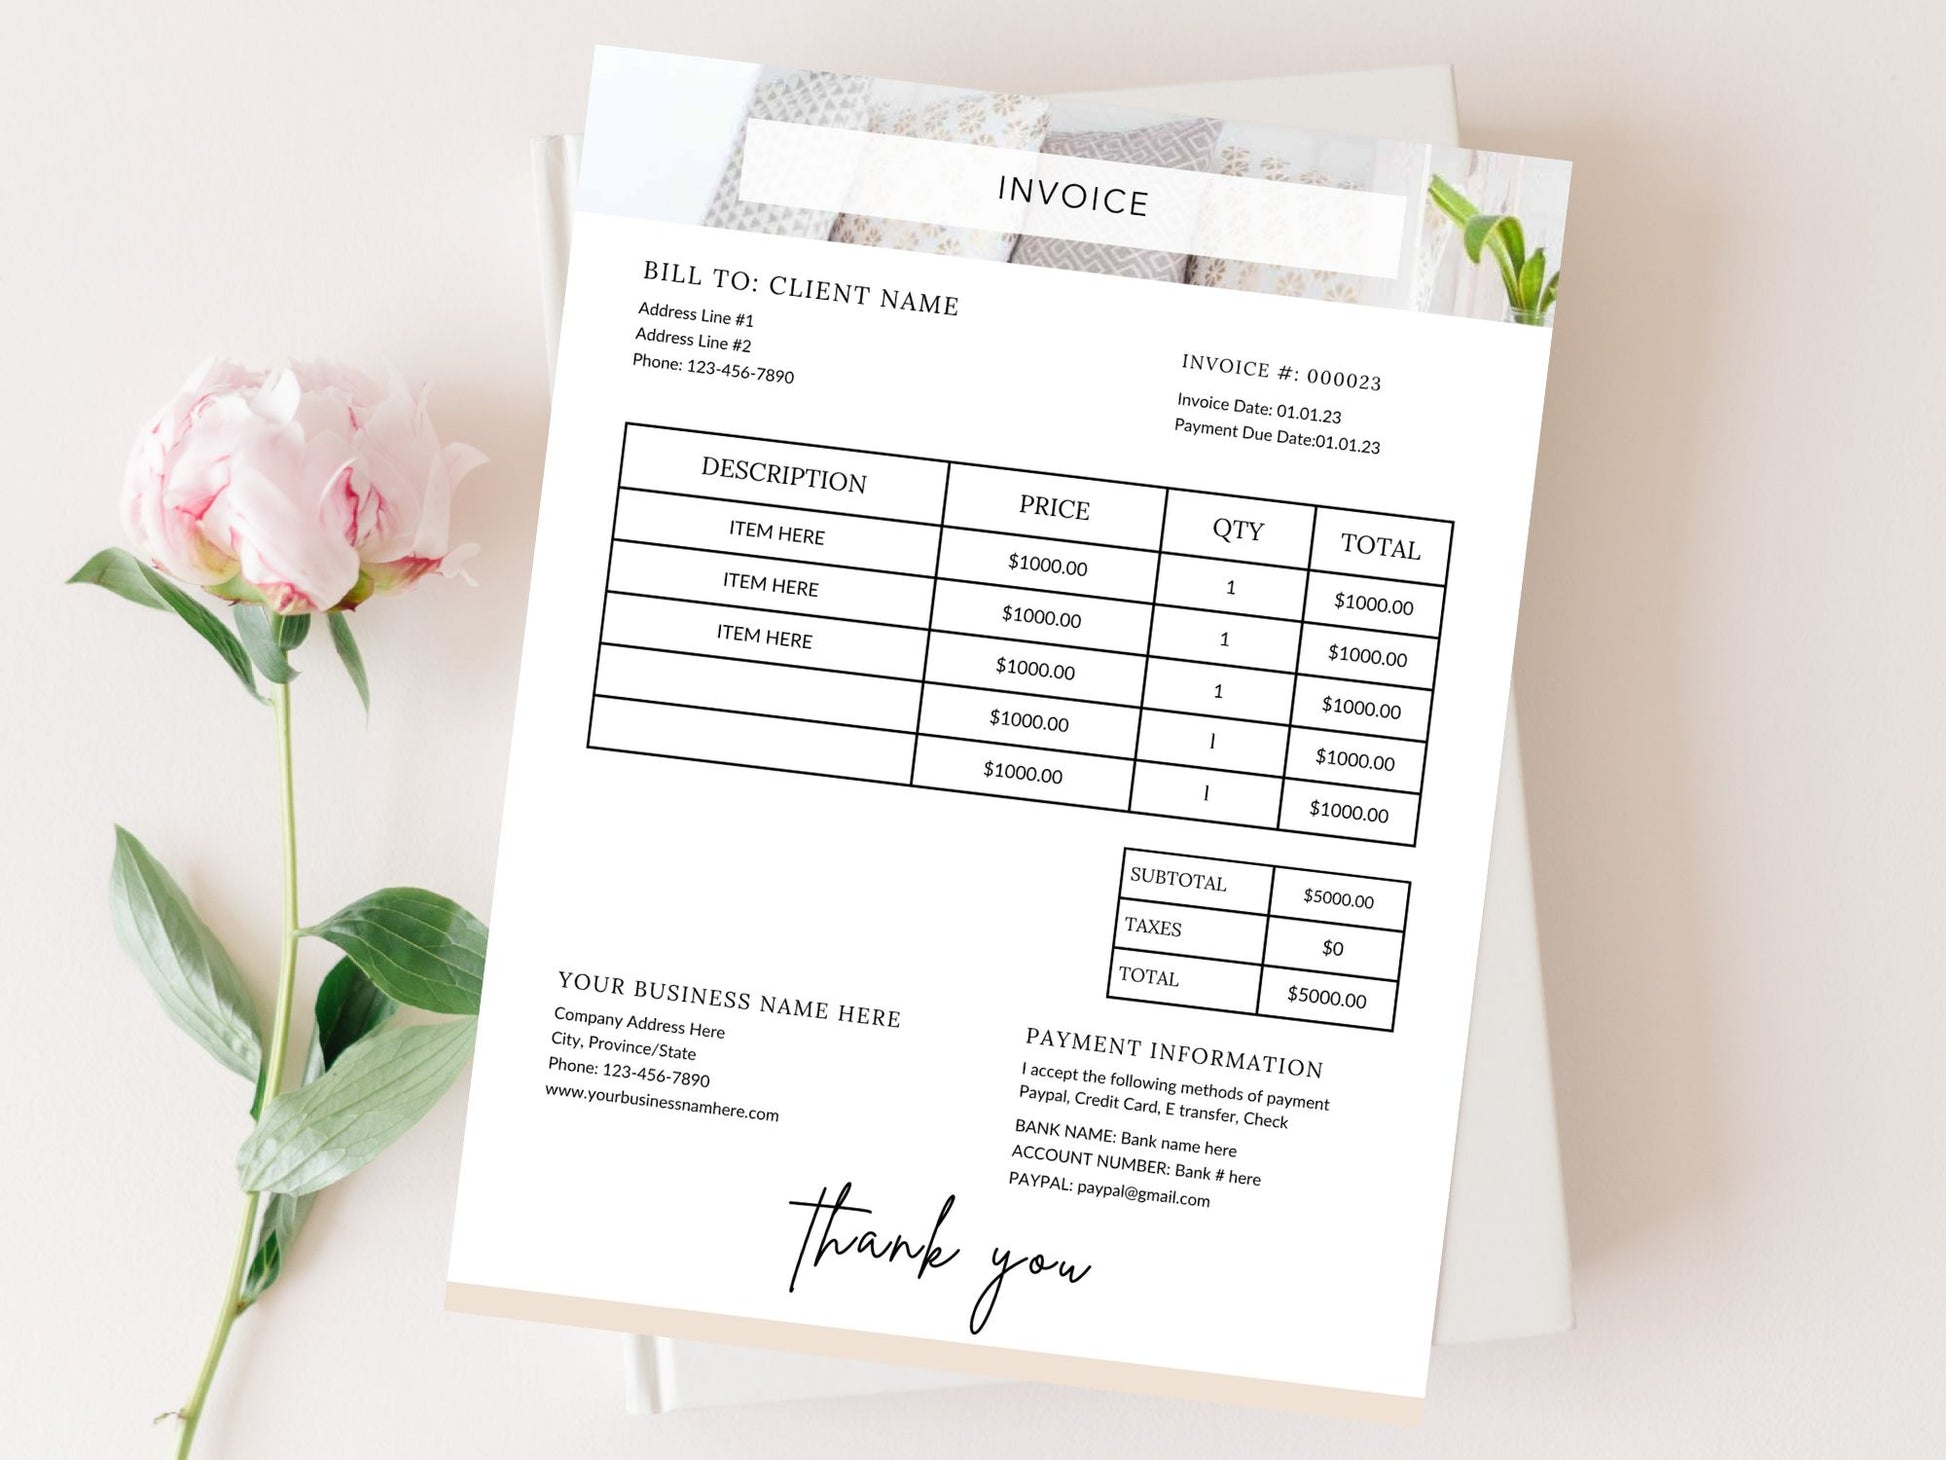 Cleaning Services Invoice - Editable template for streamlining the billing process, ensuring accuracy and professionalism in invoicing clients for cleaning services in the cleaning business.